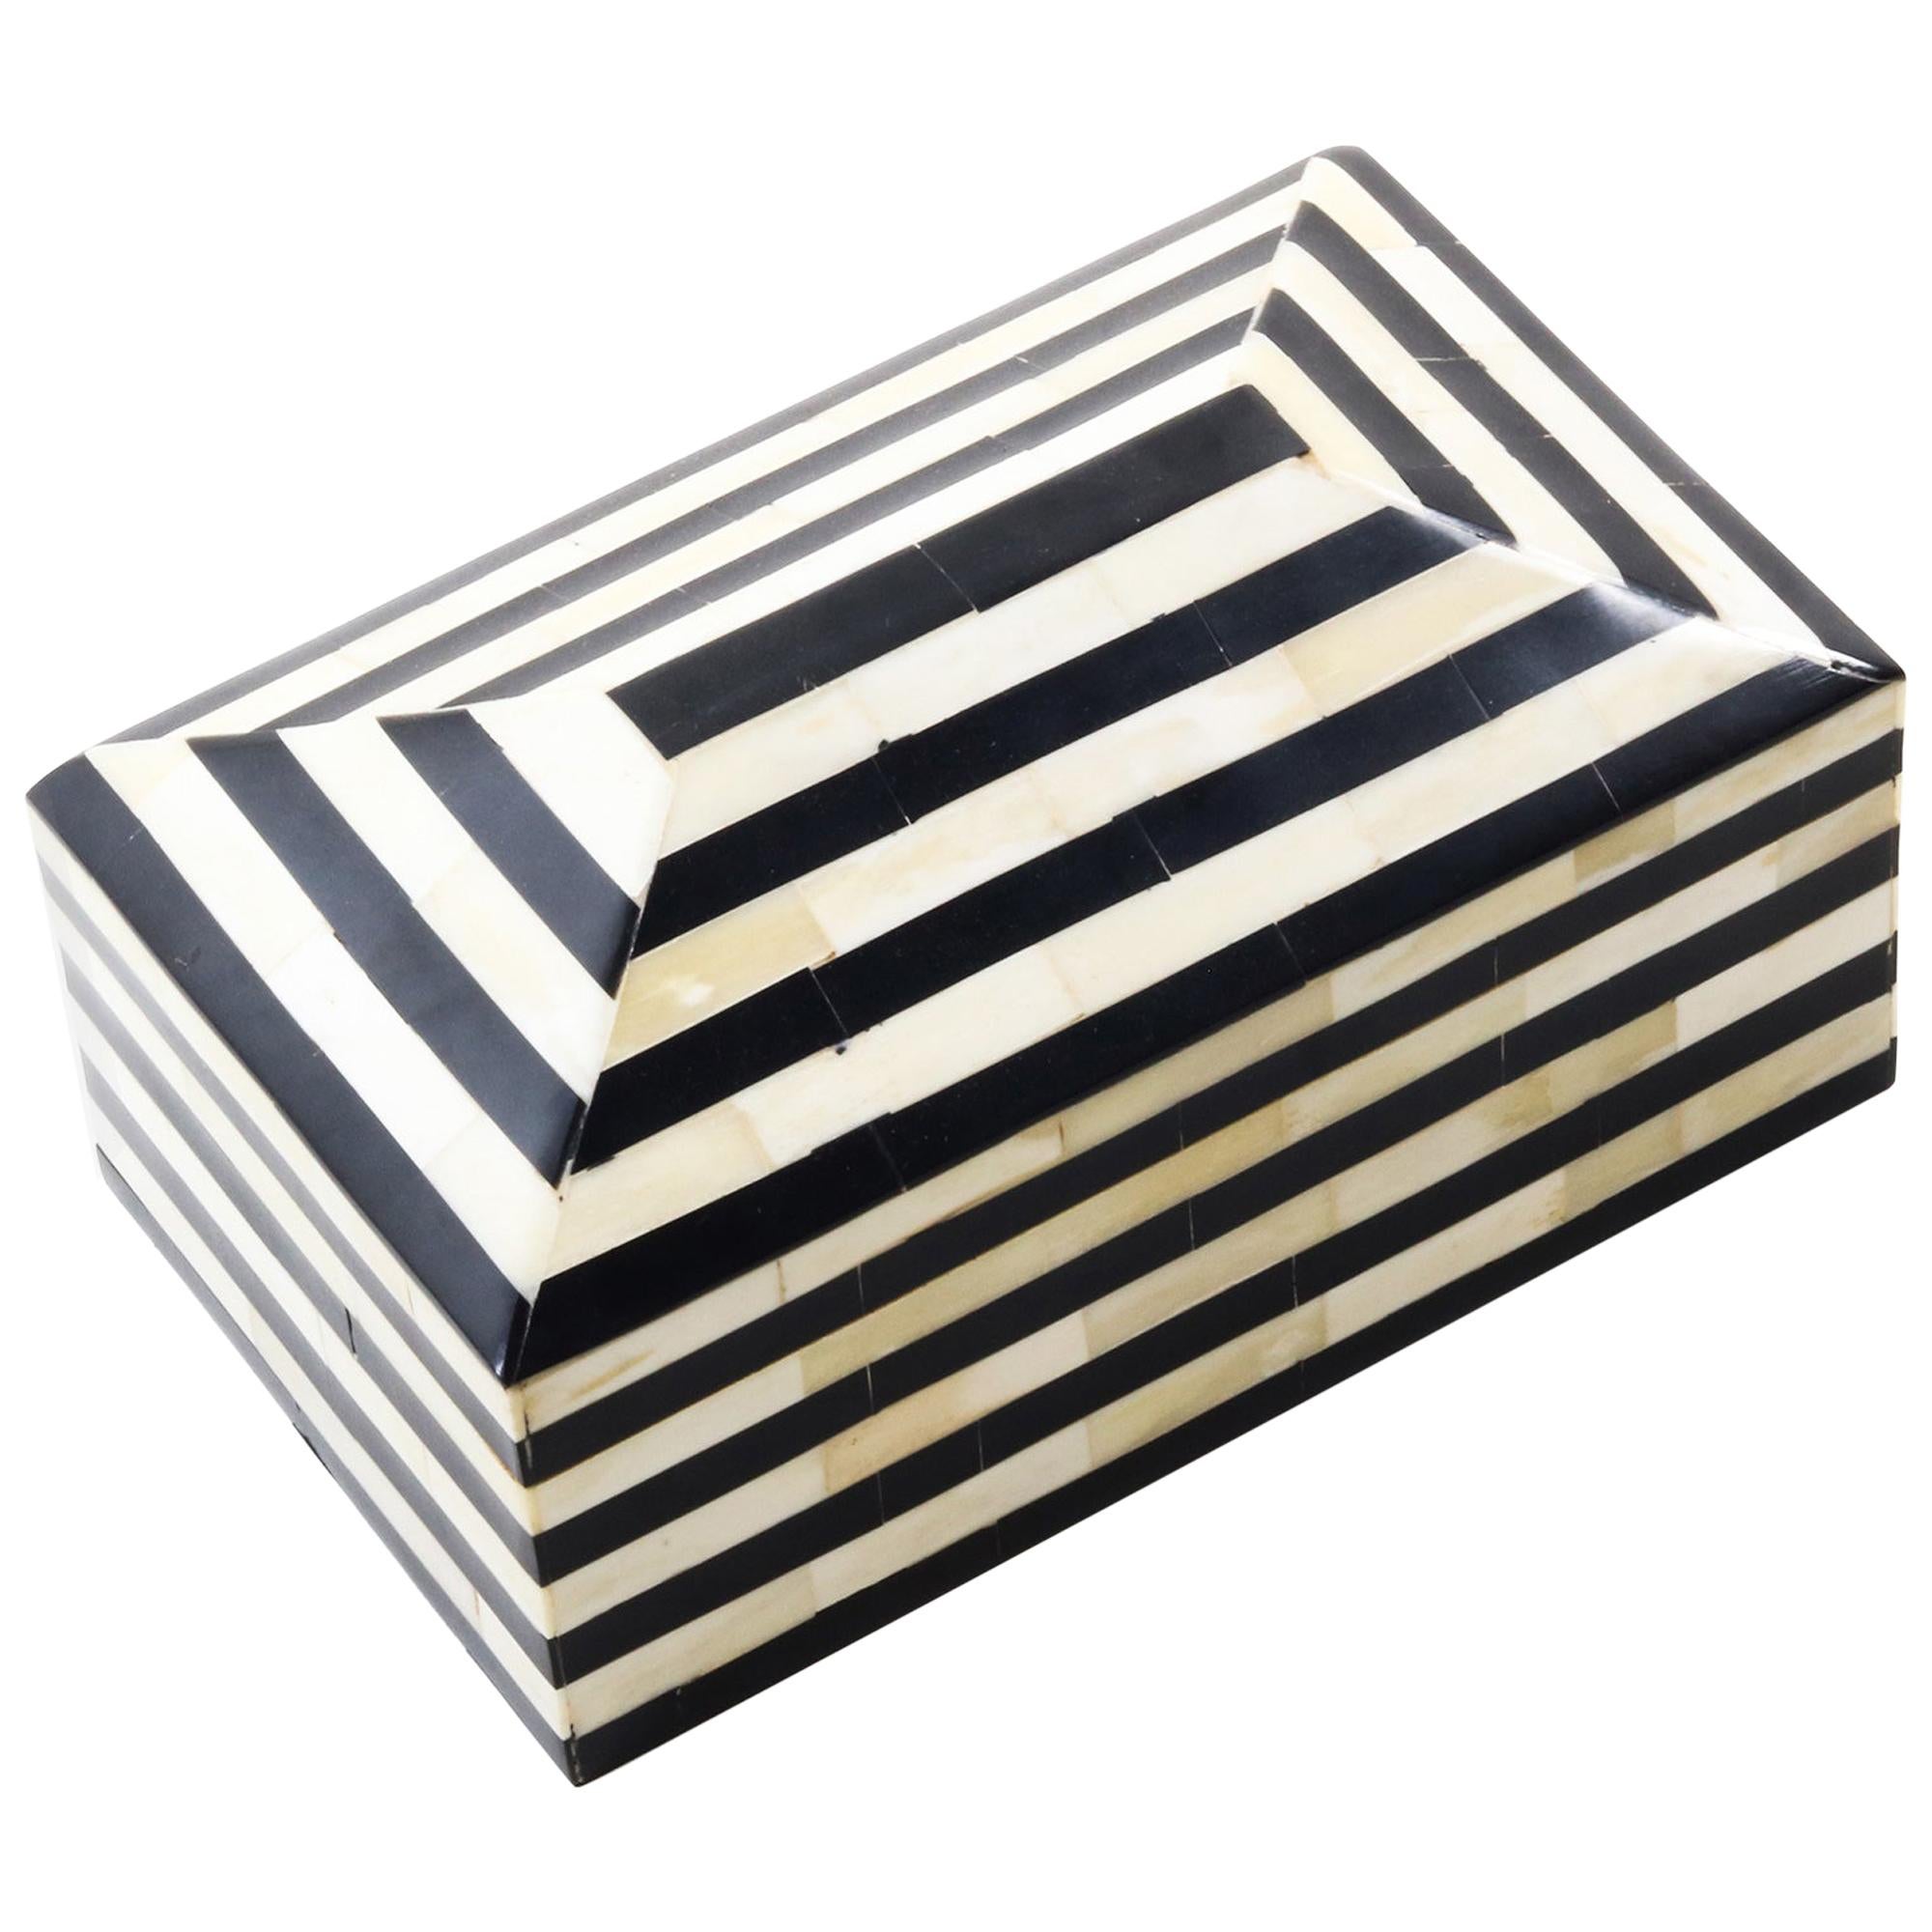 James Box in Ivory and Black Bone by Curatedkravet